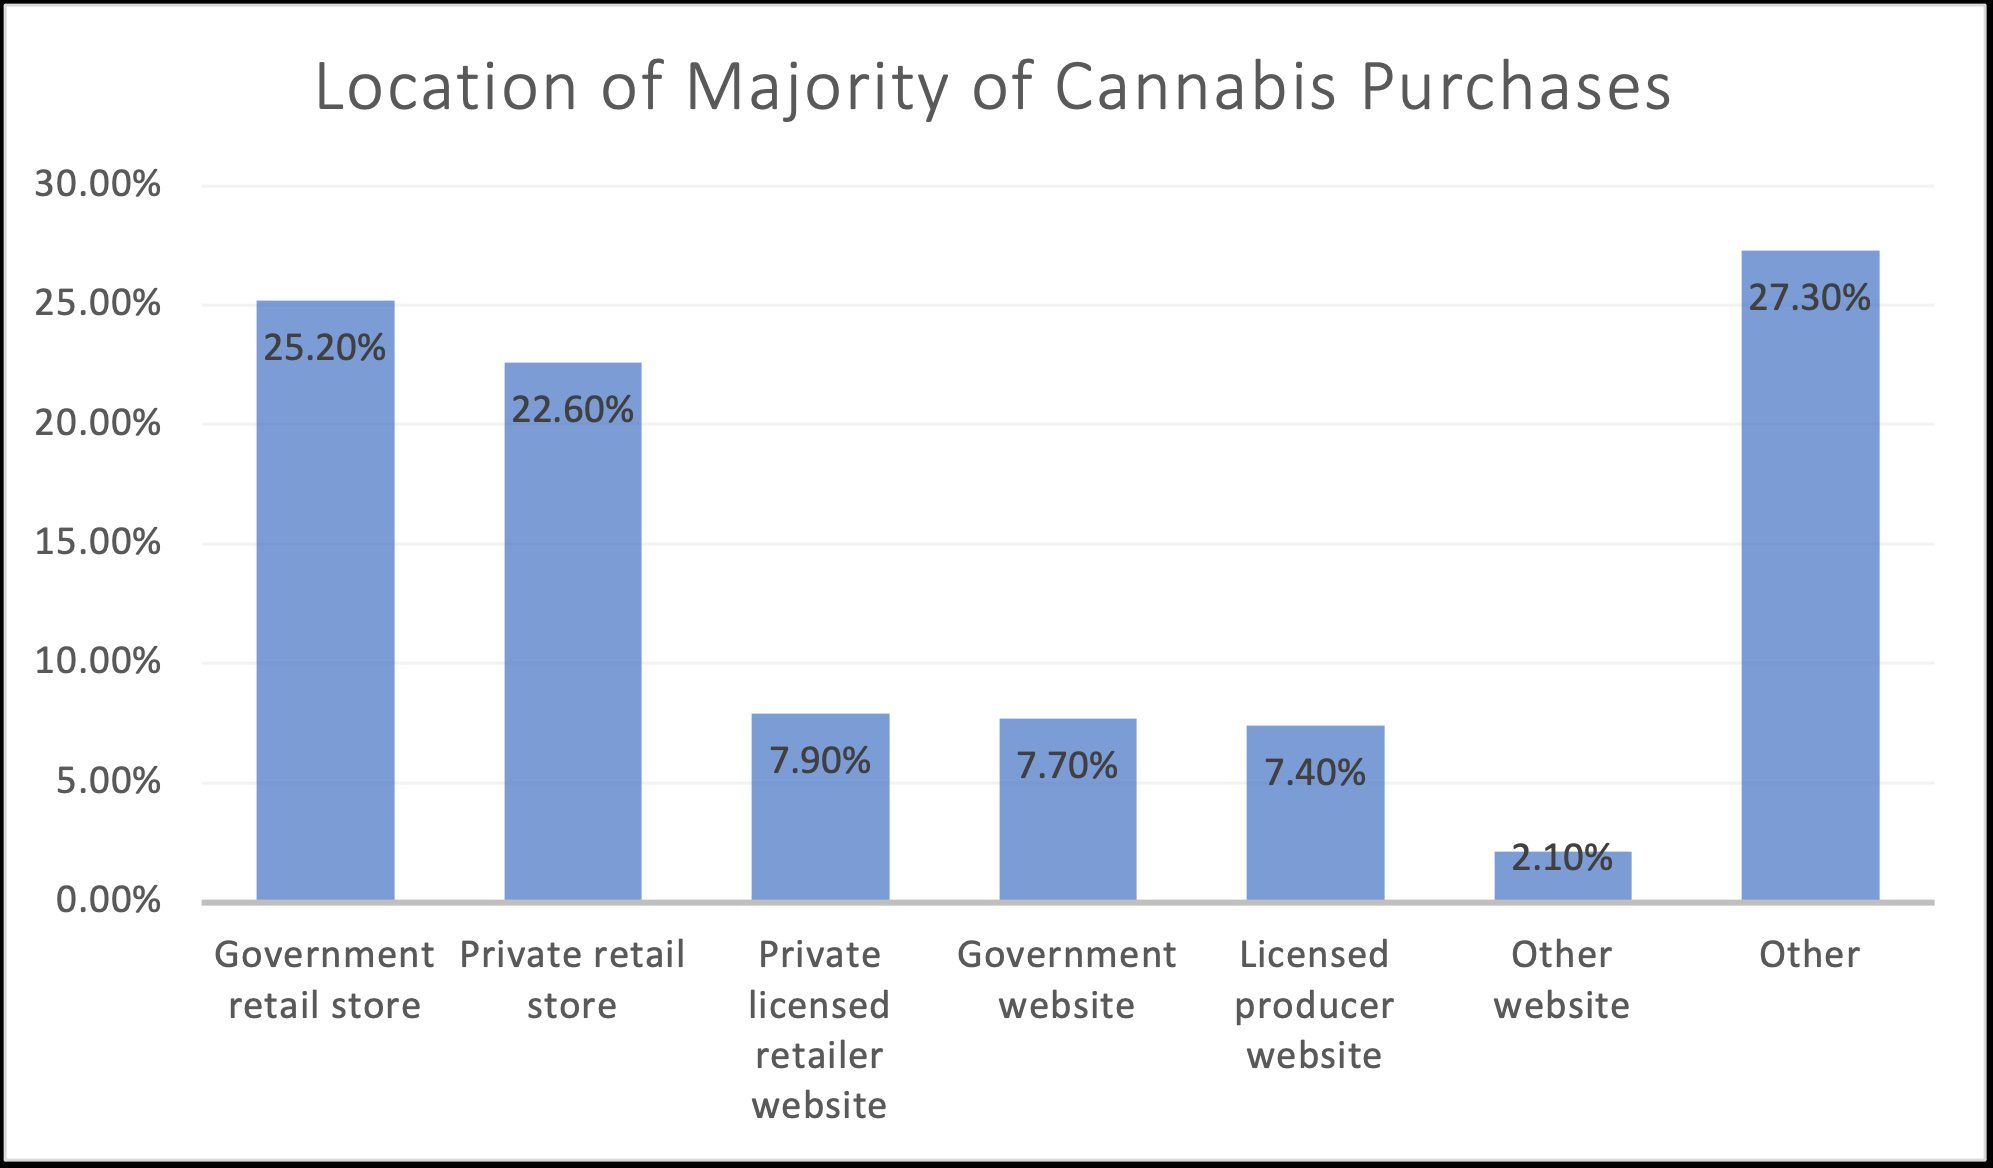 Location of cannabis purchases